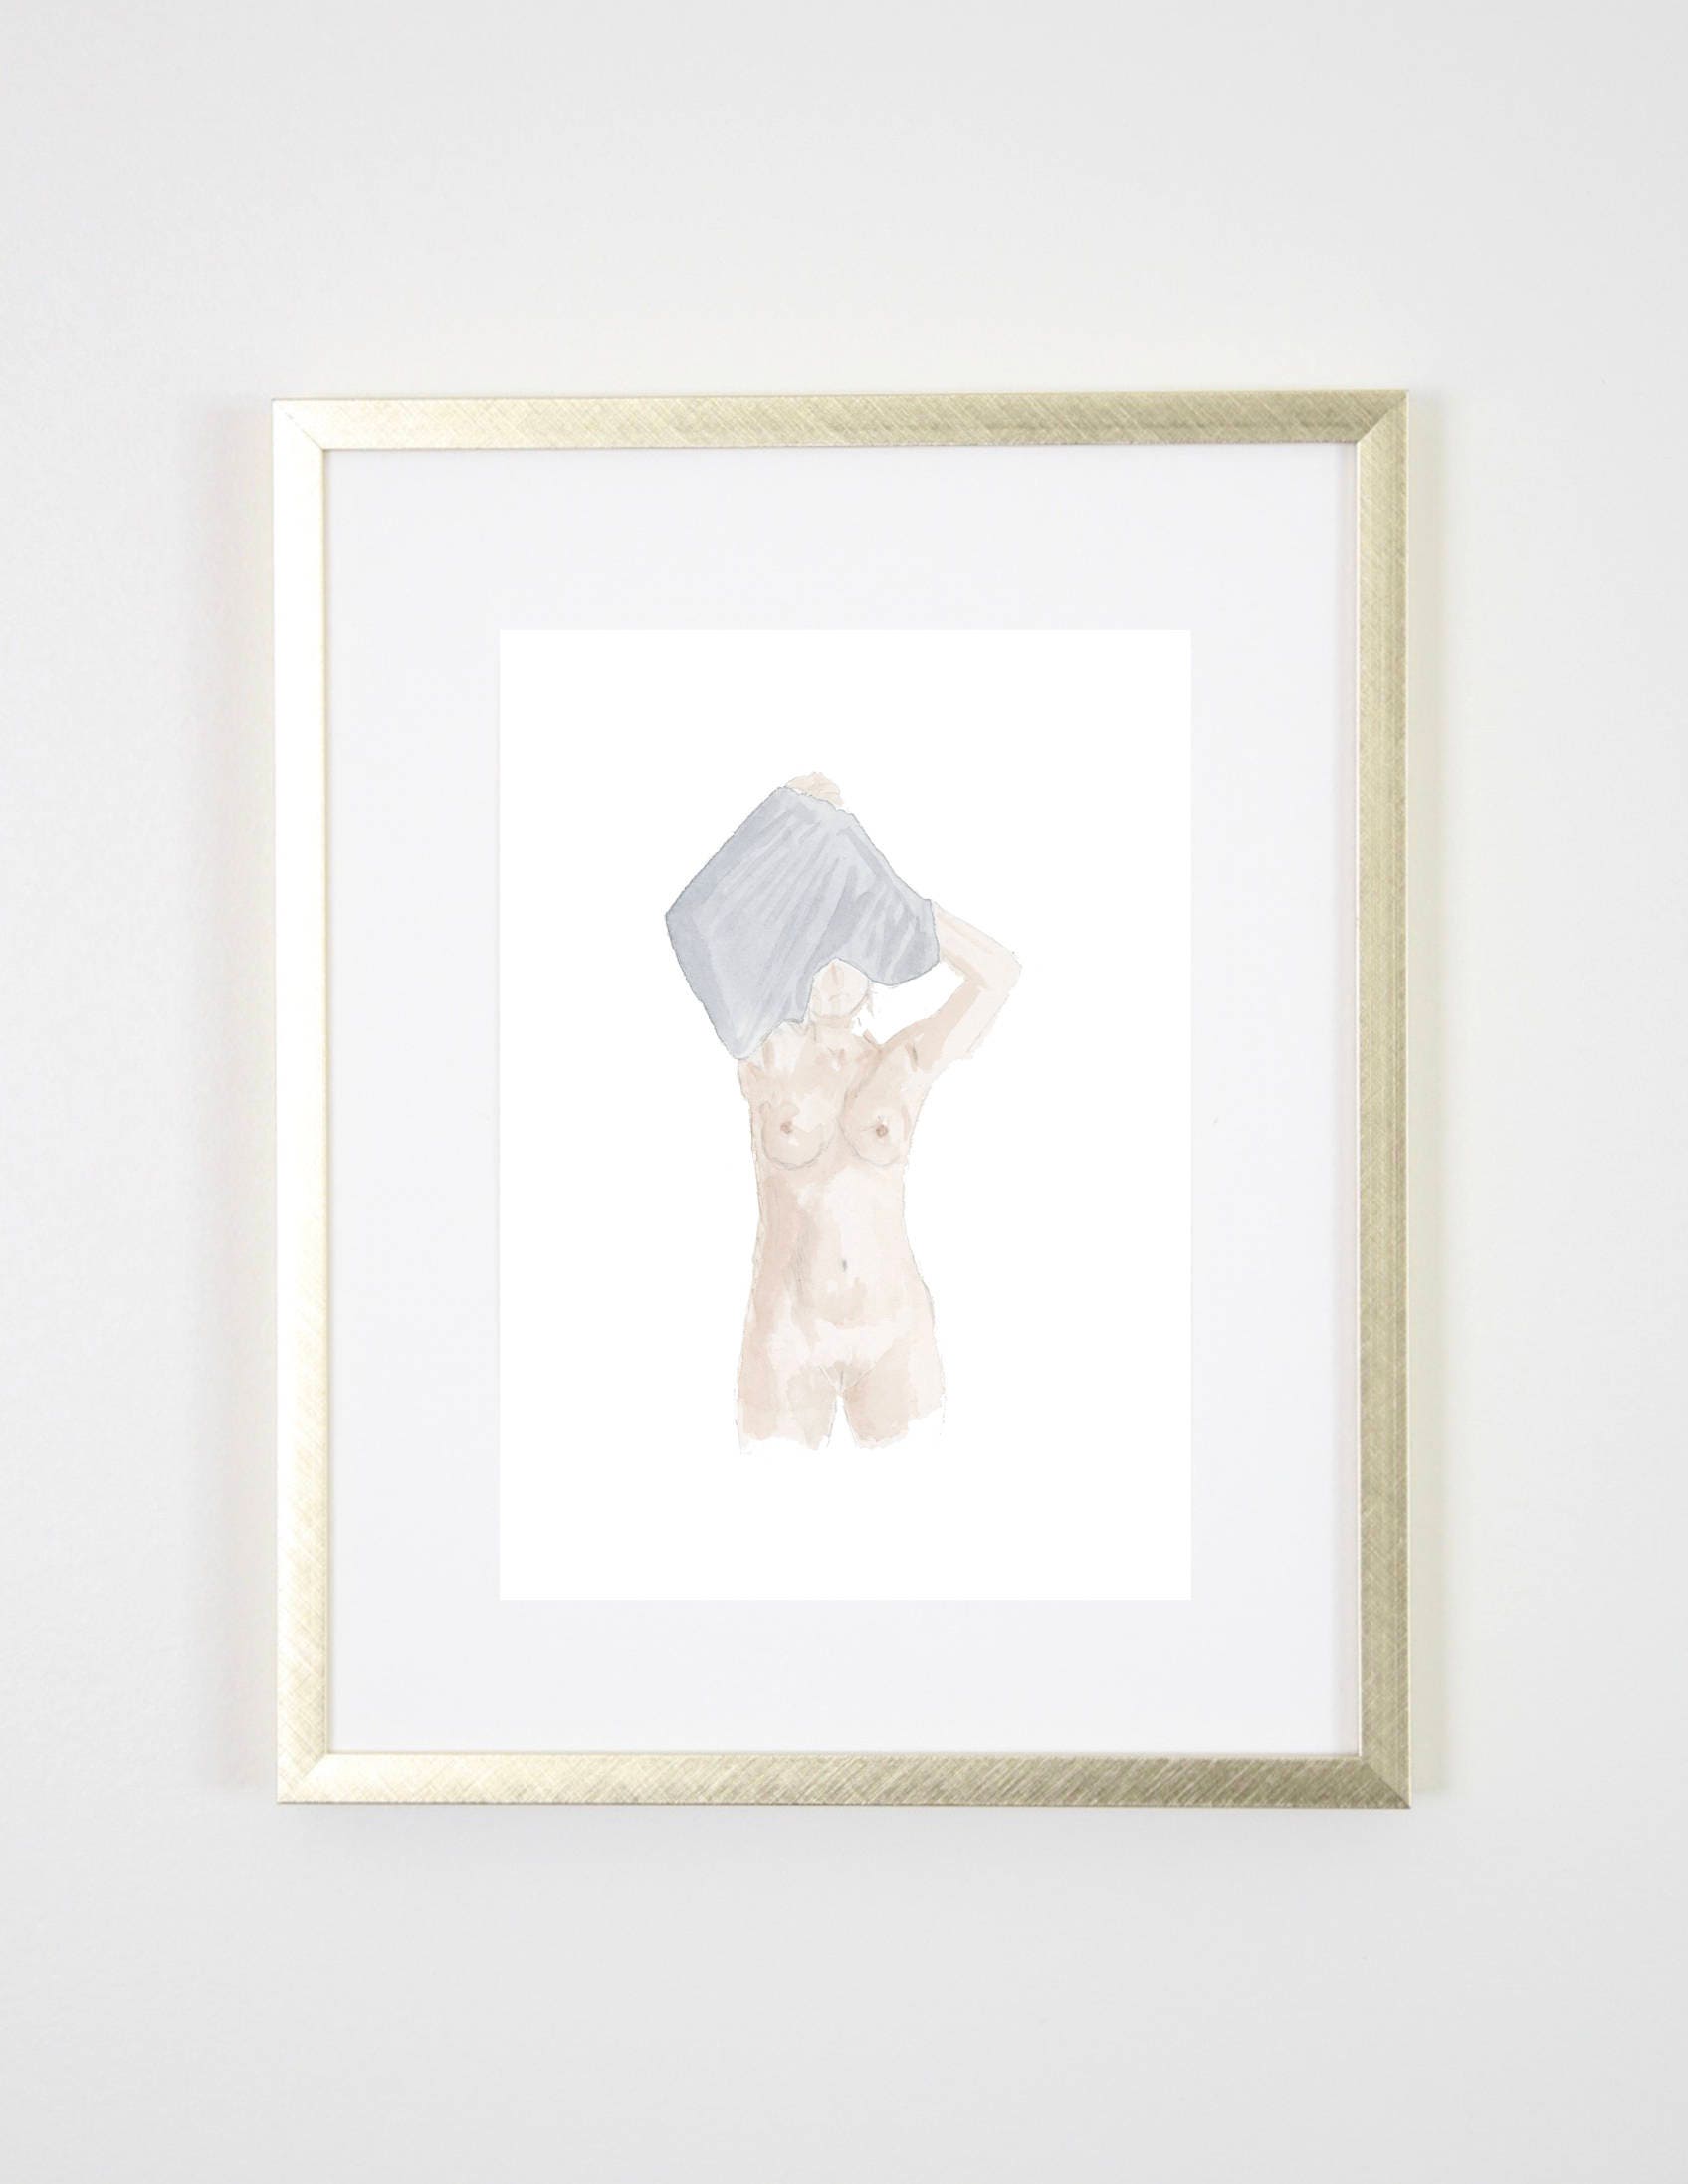 Limited edition Signed Print from original watercolor painting figure female 